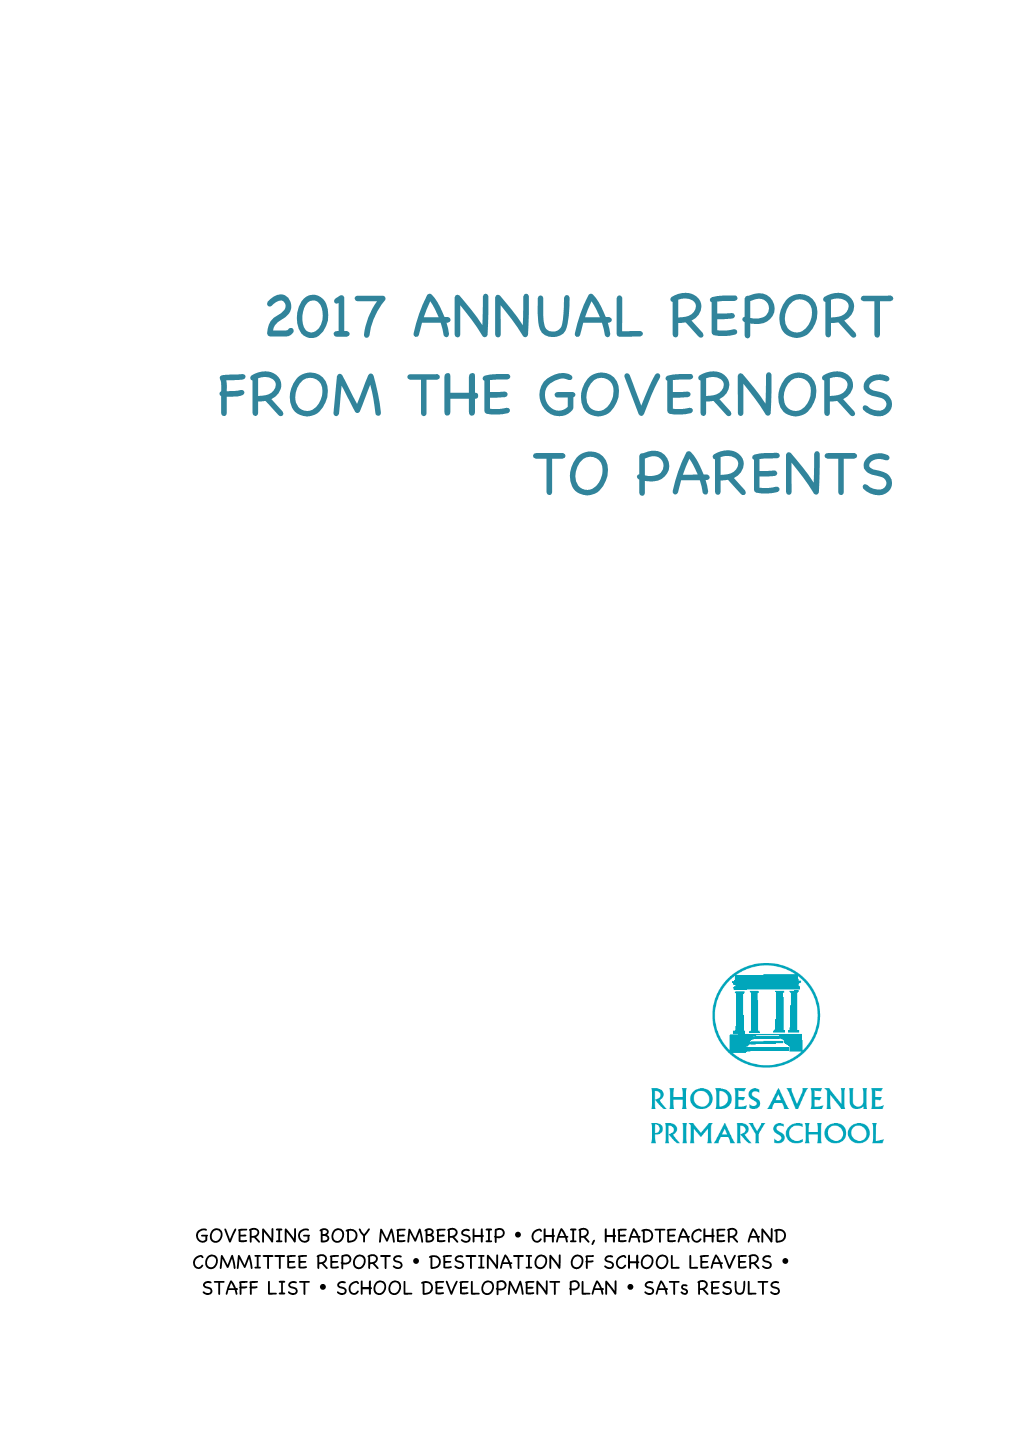 2017 Annual Report from the Governors to Parents